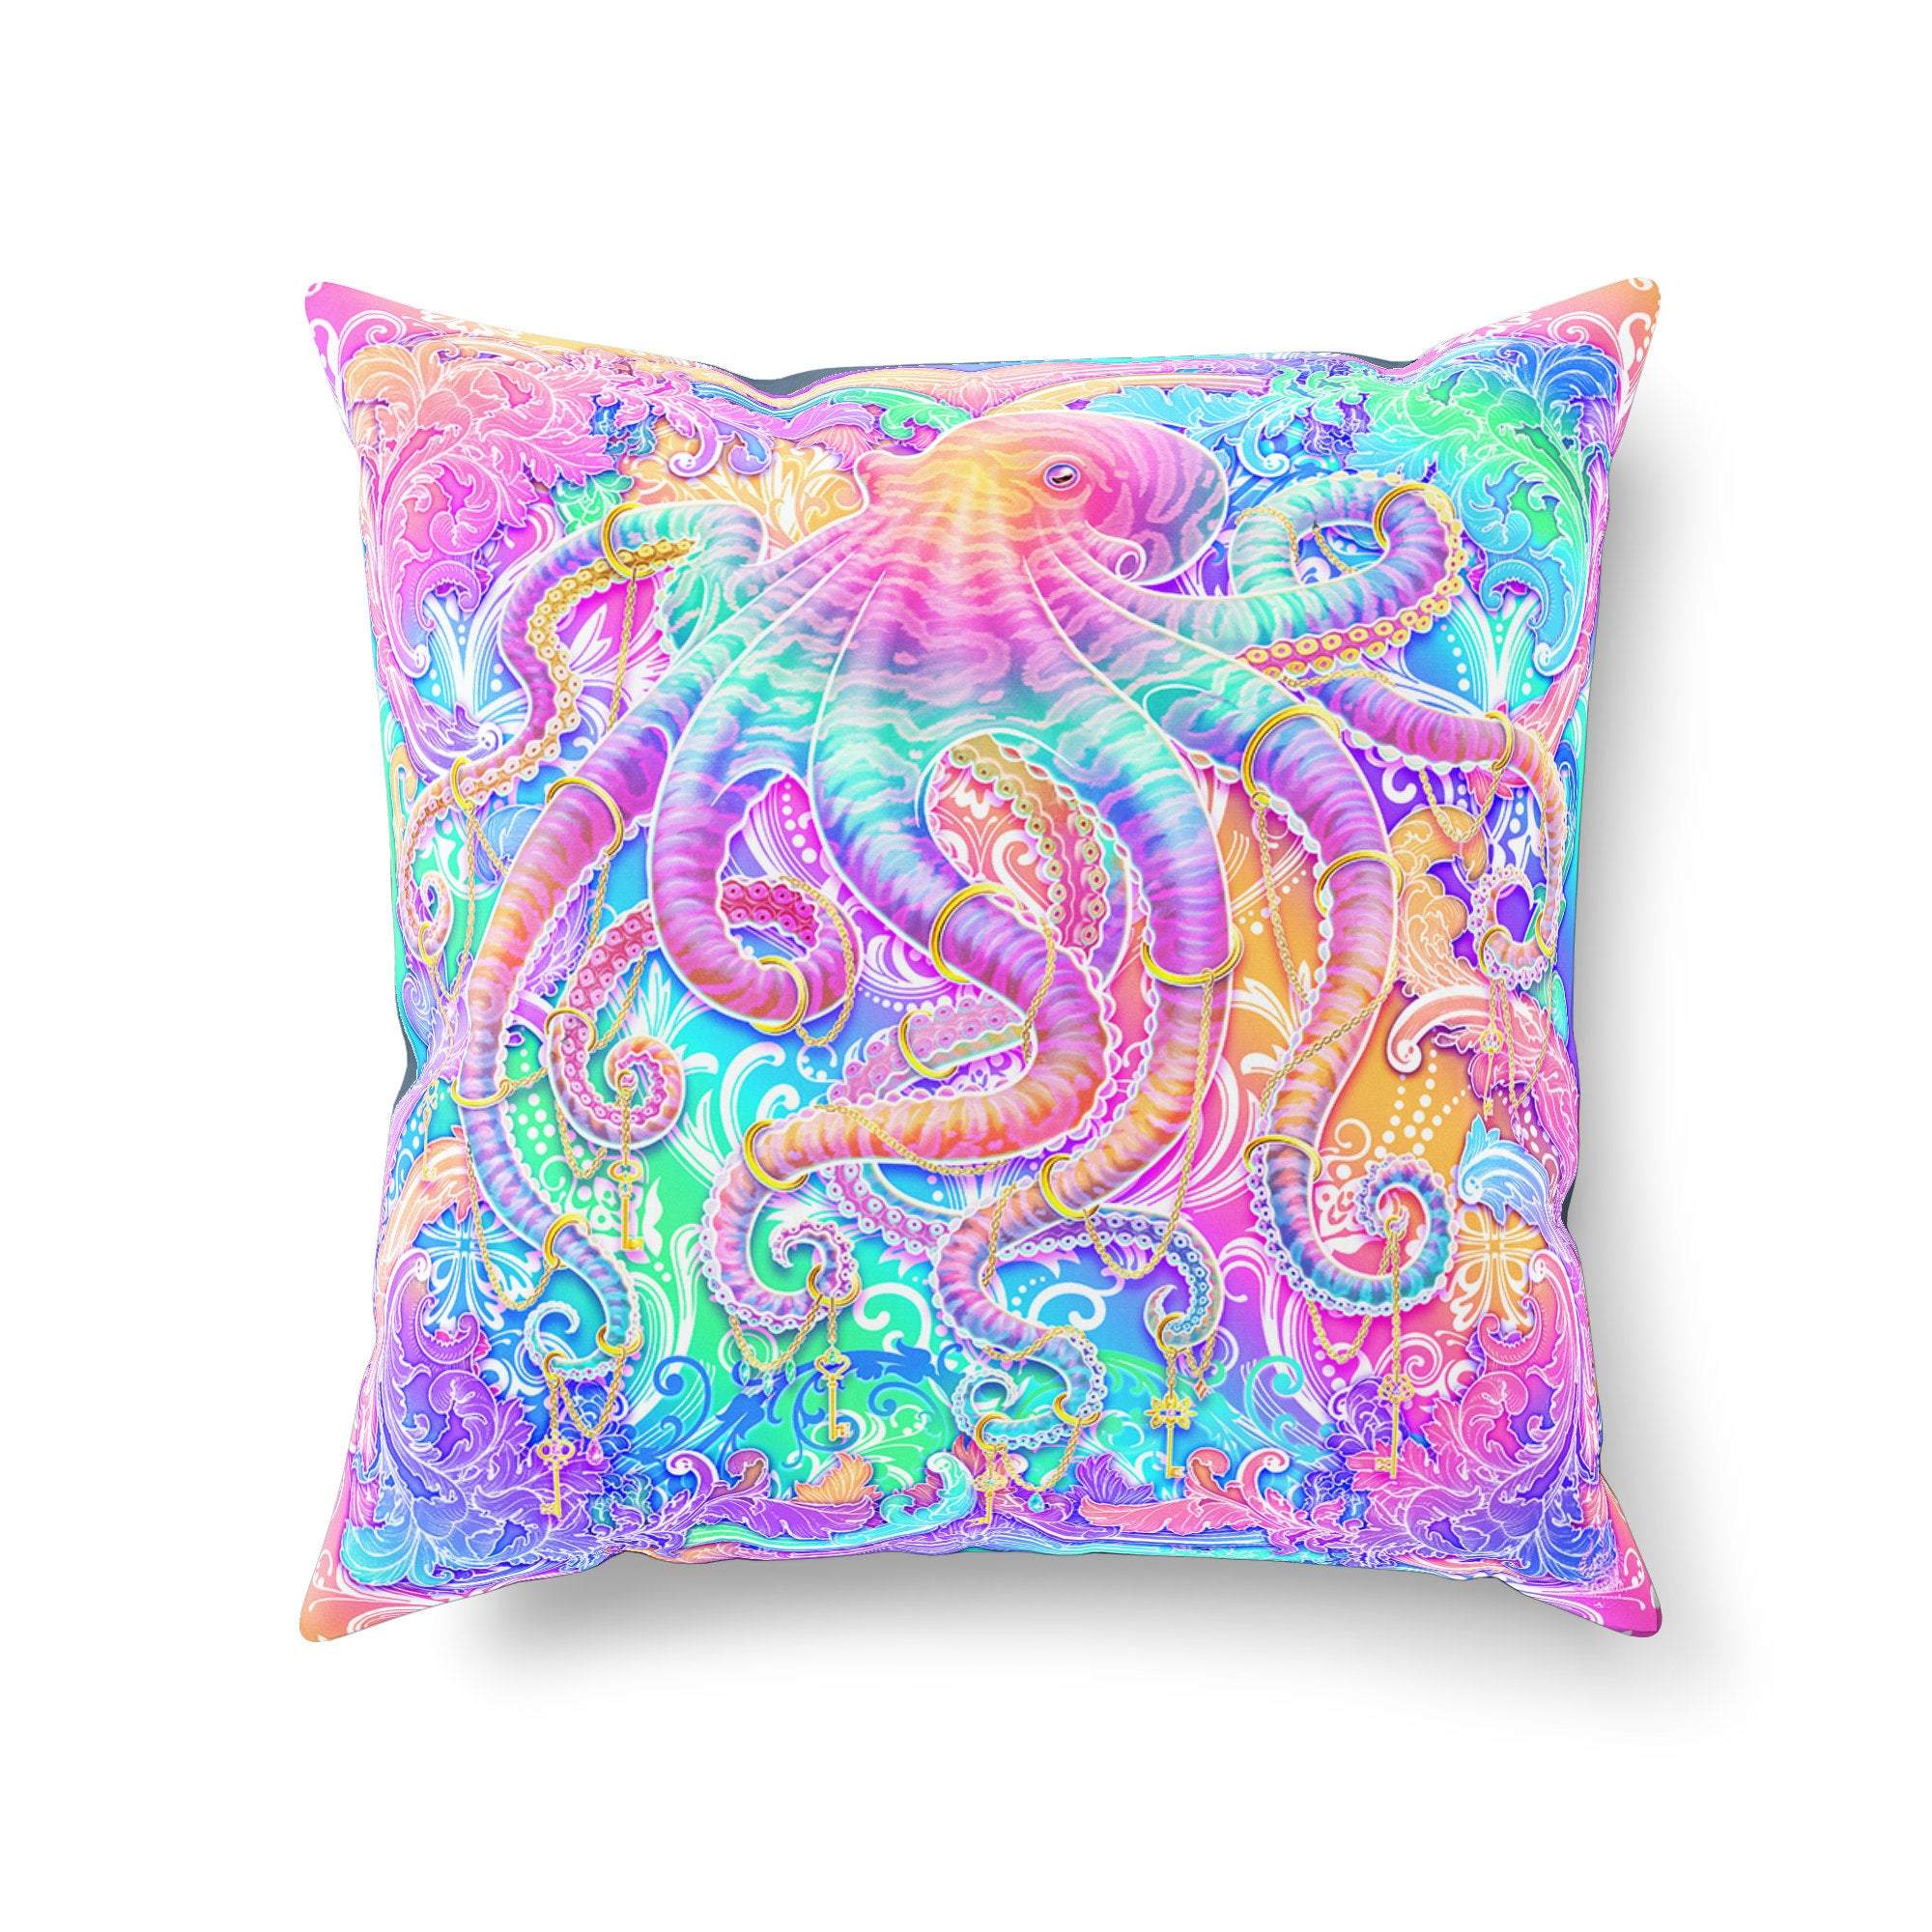 Pastel Throw Pillow, Decorative Accent Cushion, Aesthetic and Holographic Decor, Fairy Kei and Yume Kawaii style, Funky and Eclectic Home - Psychedelic, Octopus - Abysm Internal